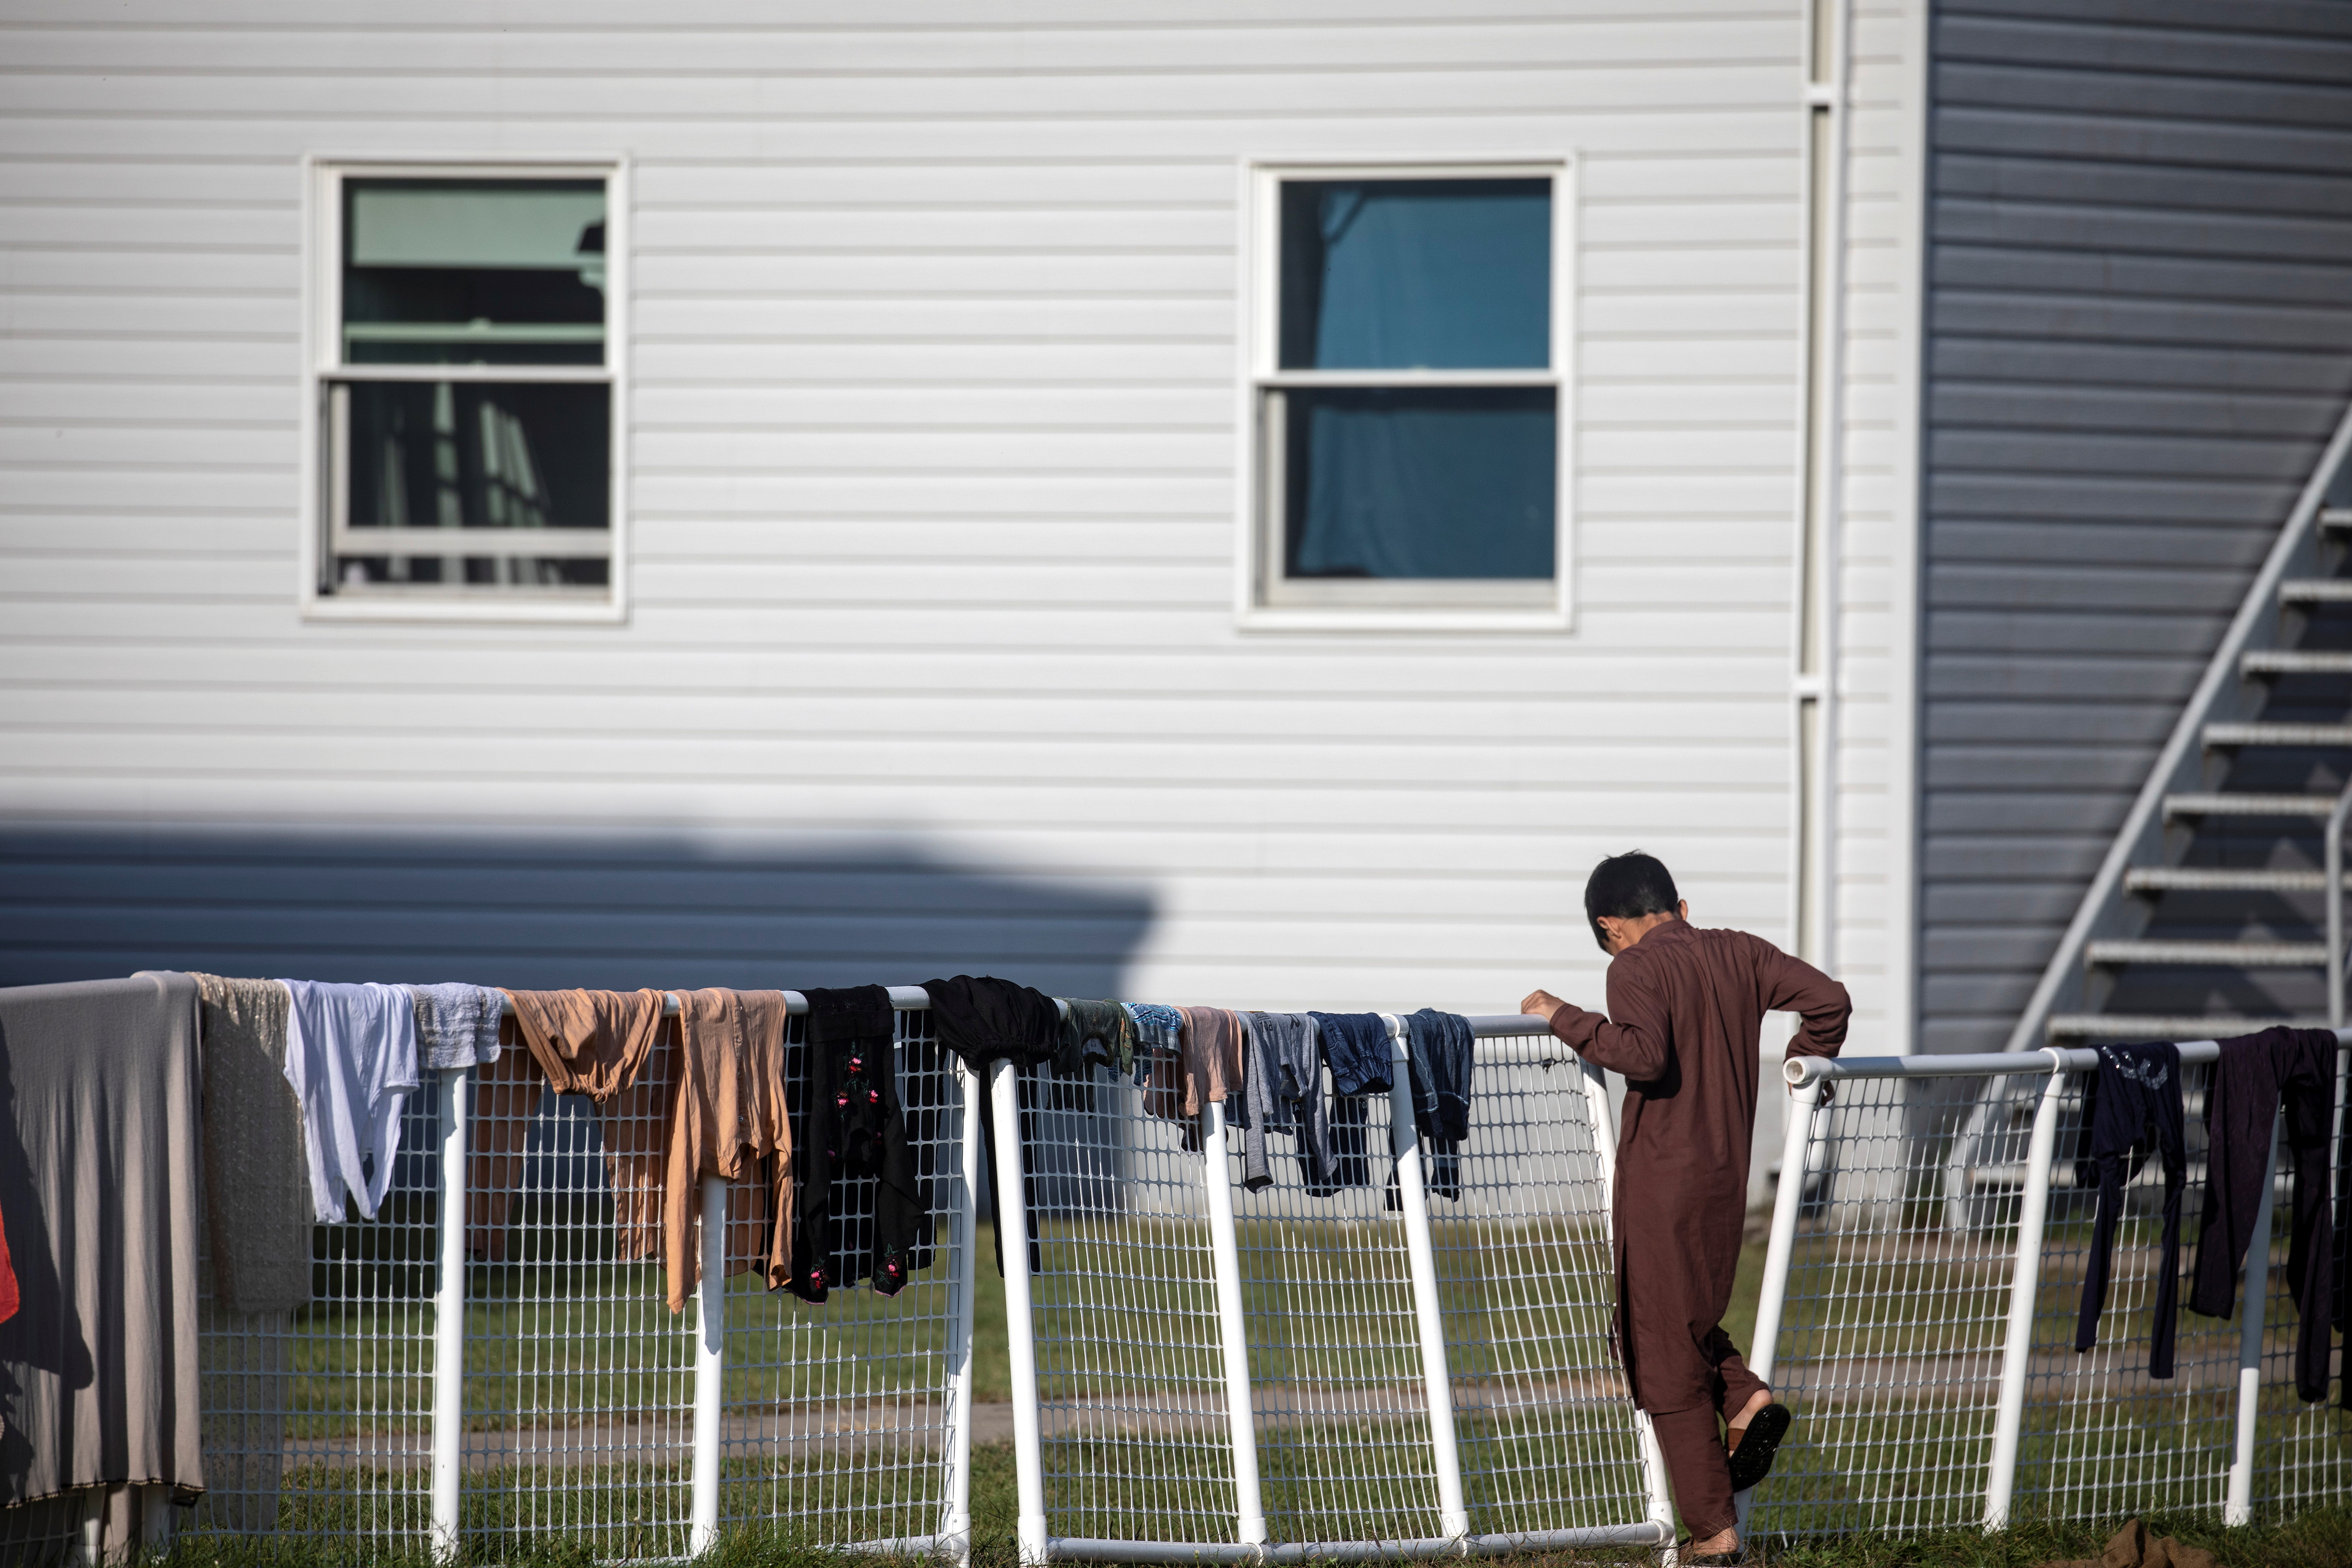 An Afghan refugee stands outside temporary housing at Fort McCoy U.S. Army base, in Wisconsin, U.S., September 30, 2021. Barbara Davidson/Pool via REUTERS